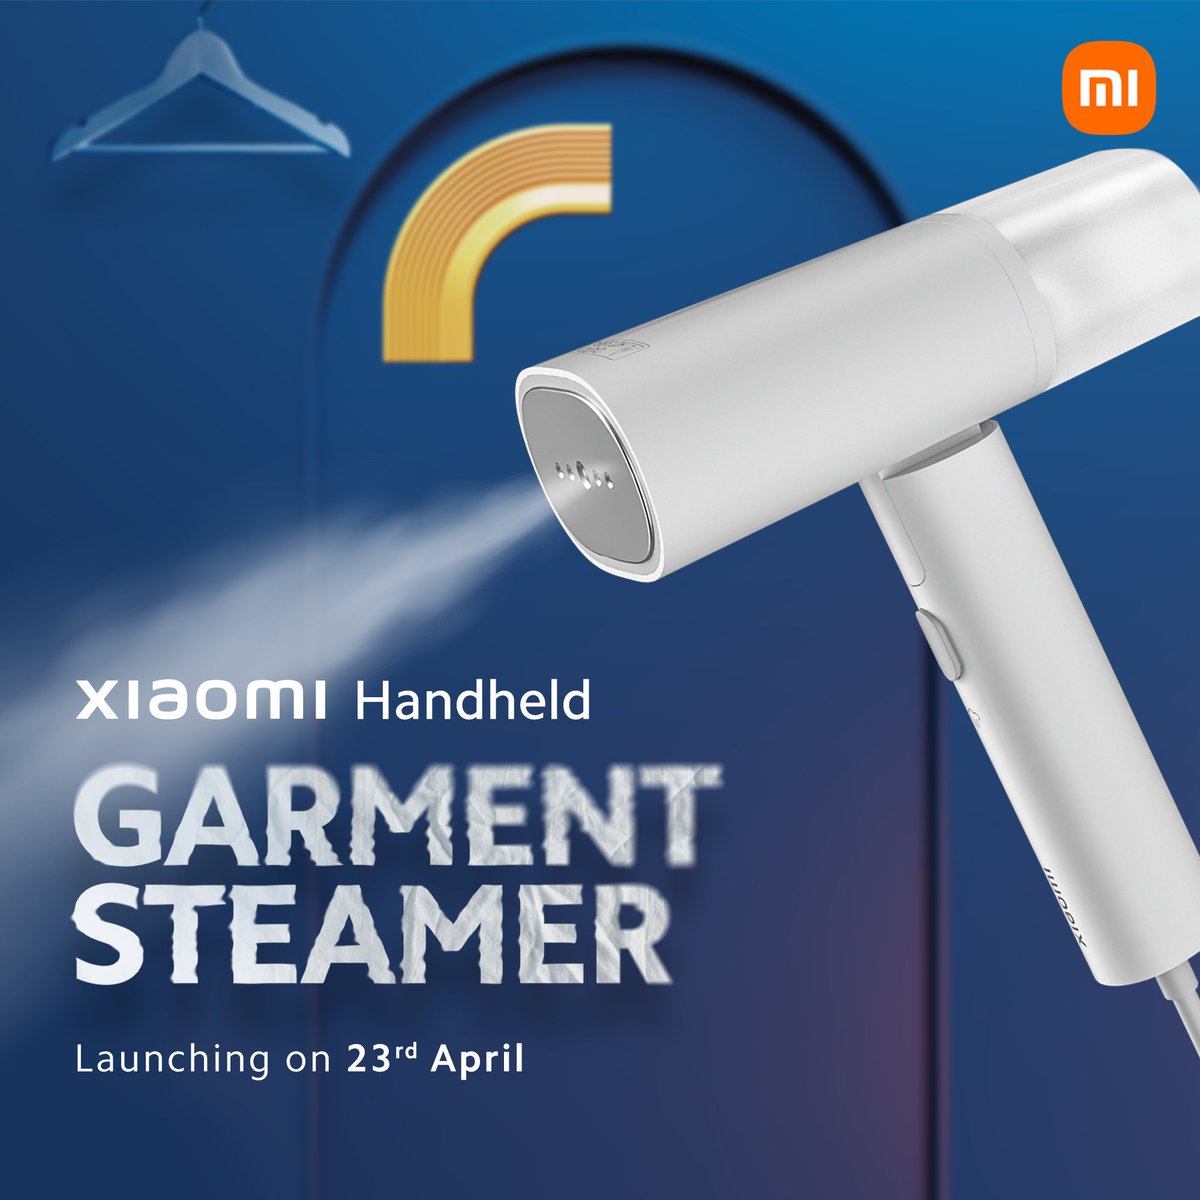 Prepare to leave wrinkles in the past and step into a new era of impeccable style with the all-new #XiaomiGarmentSteamer. 

This newest member to #Xiaomi's ecosystem is set to revolutionize the market and elevate your wardrobe game. 

Launching on 23rd April with…